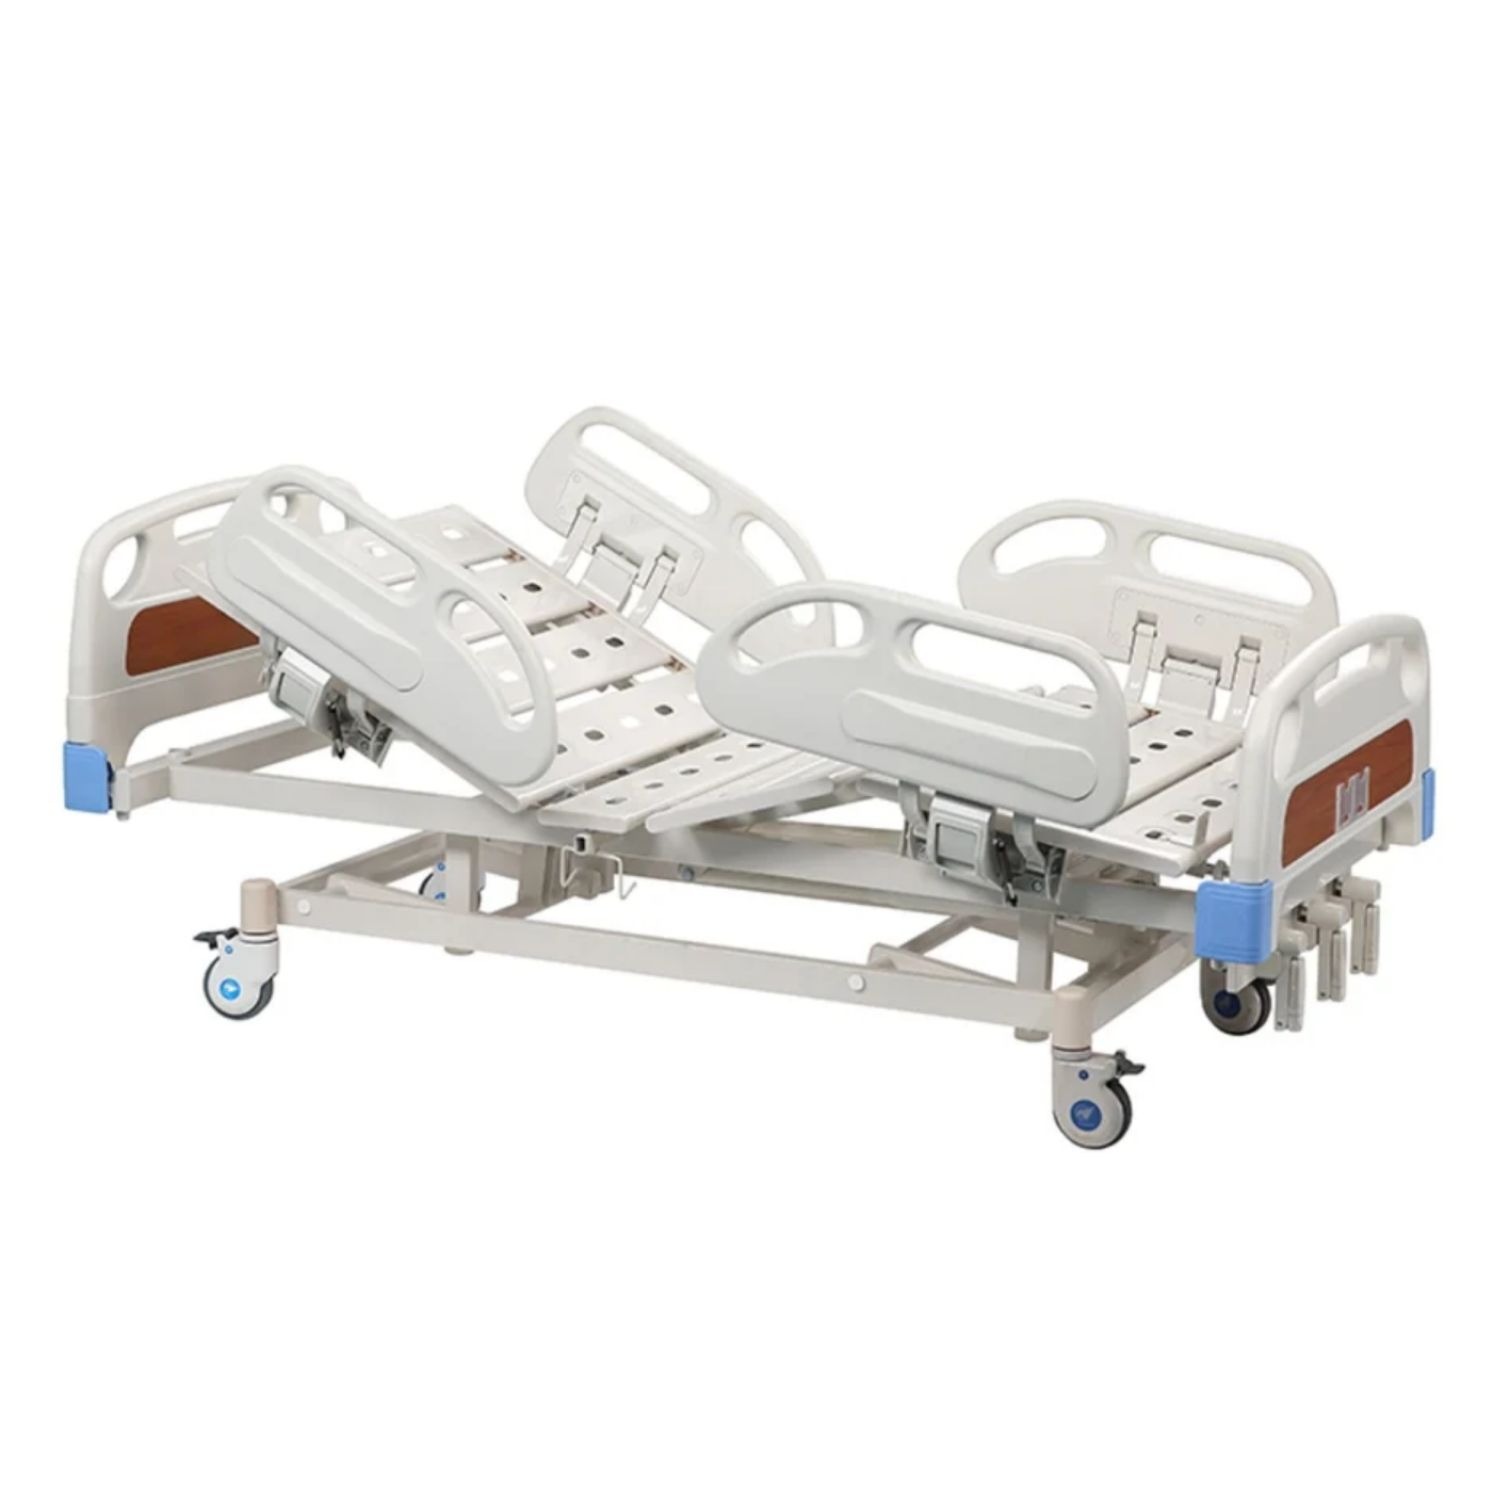 MPS Medical Equipments - Three Function Manual ICU Bed renting solutions at your home care